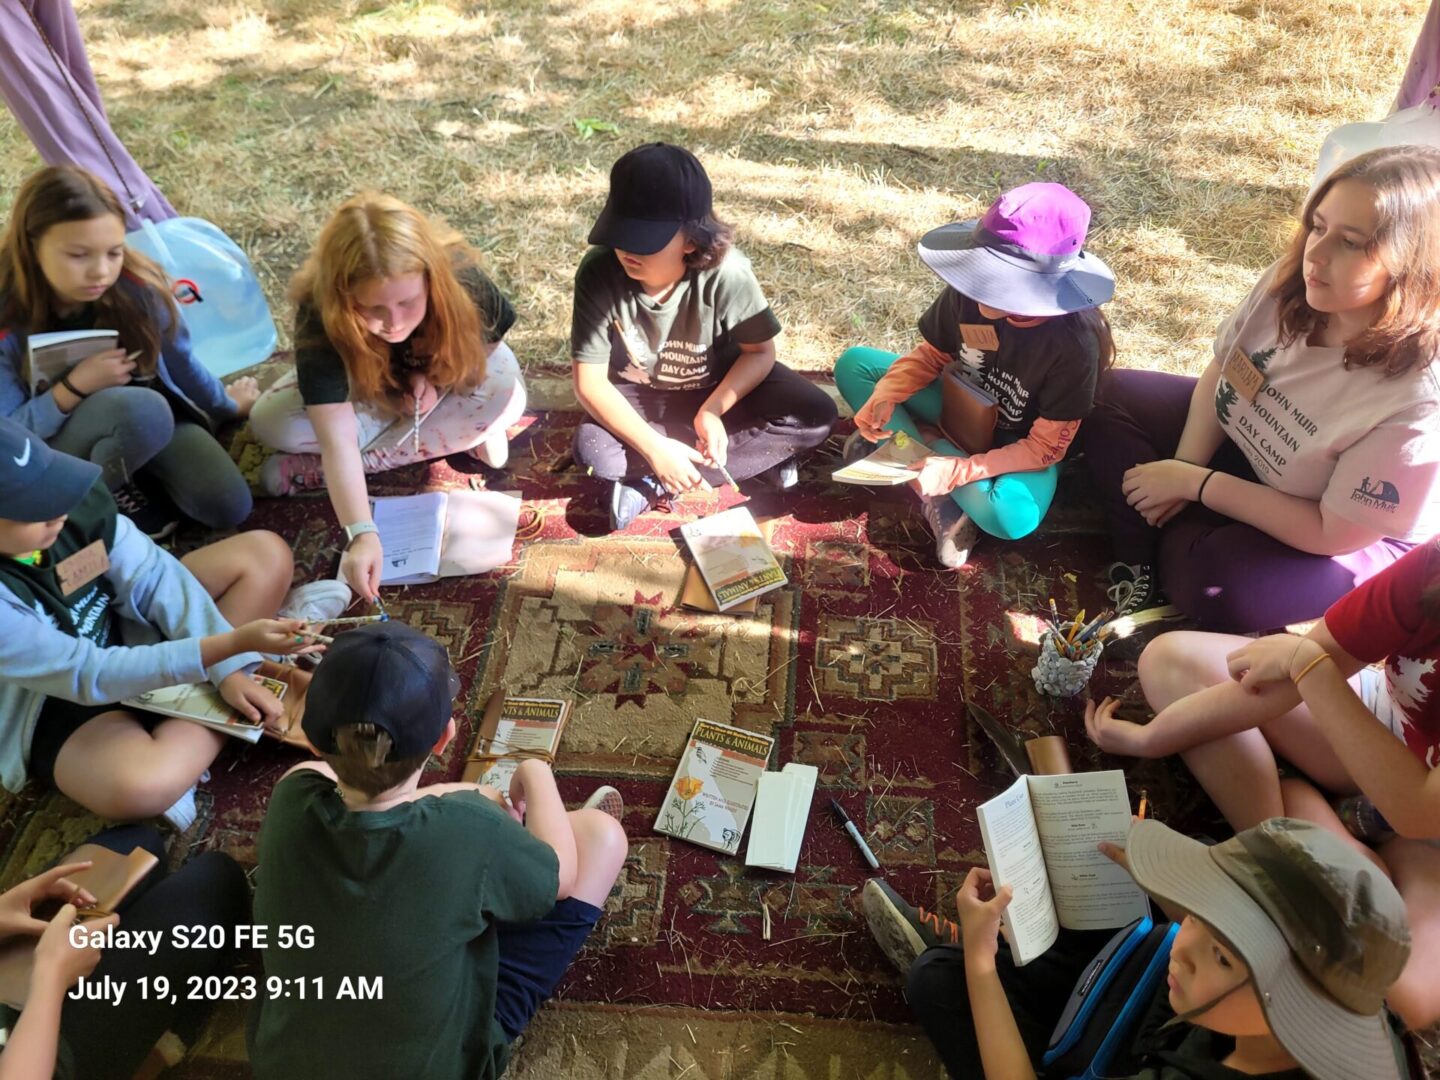 A group of people sitting on the ground reading books.